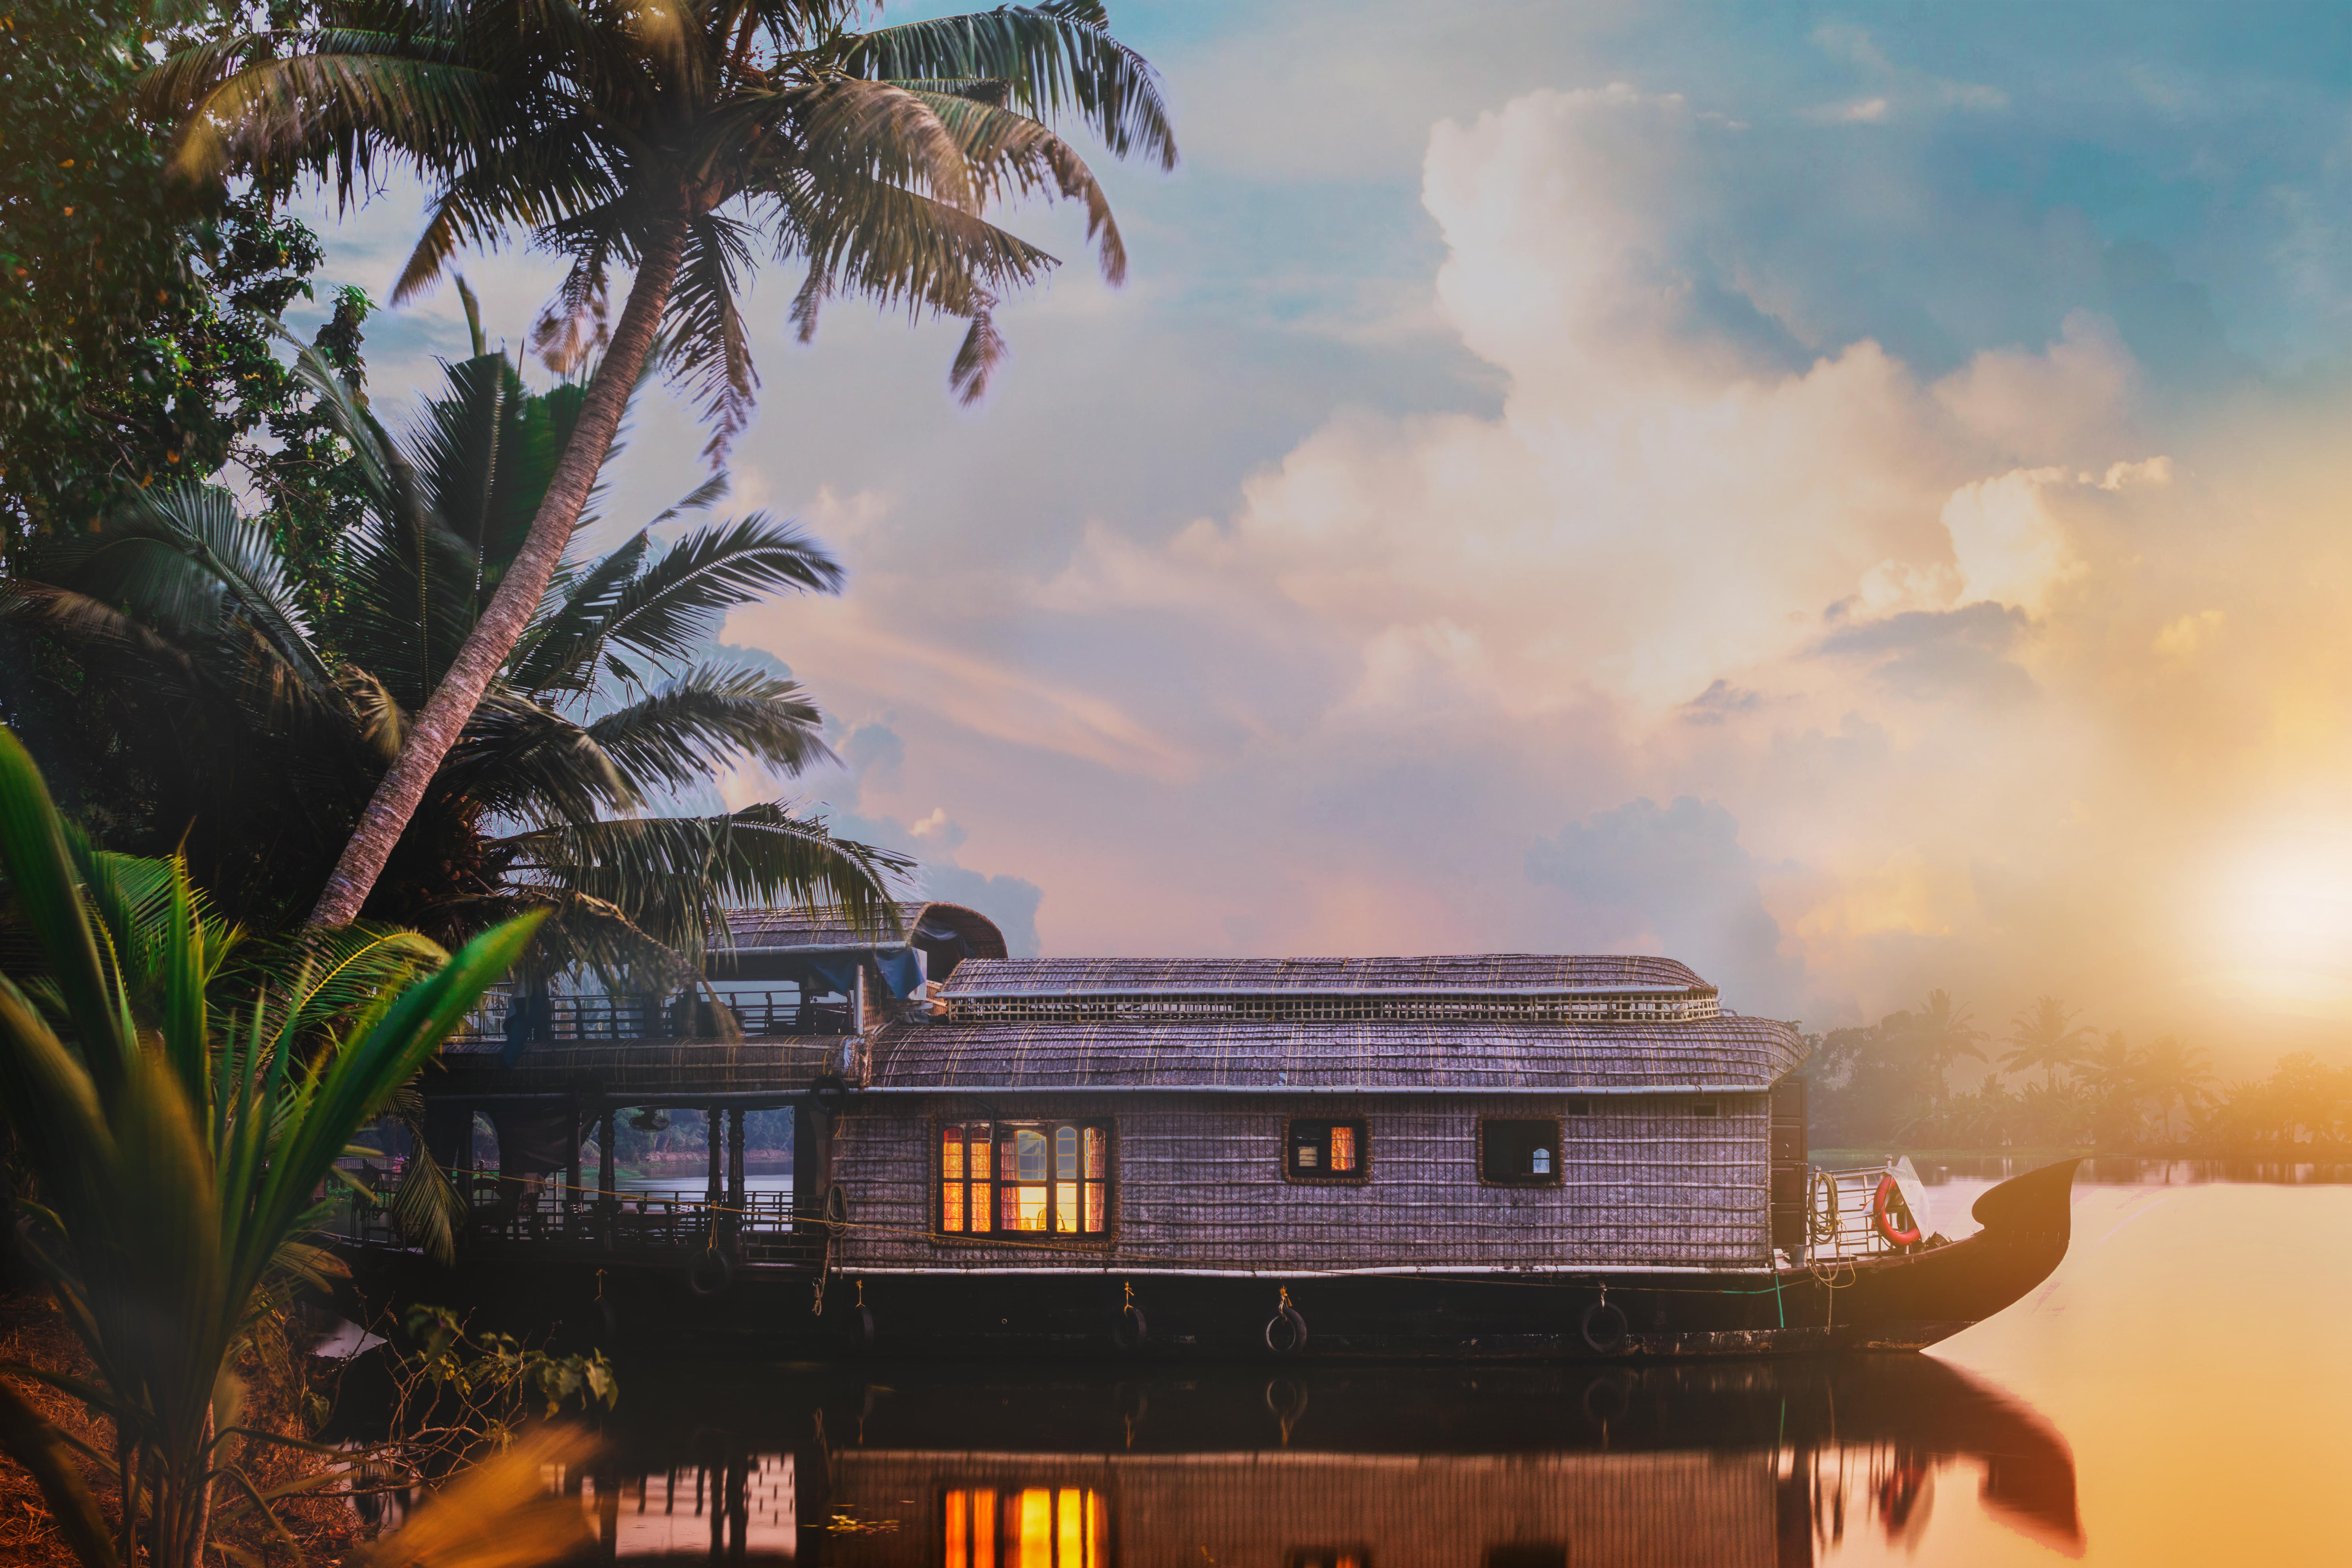 Witness the traditional houseboat in Alleppey during sunset